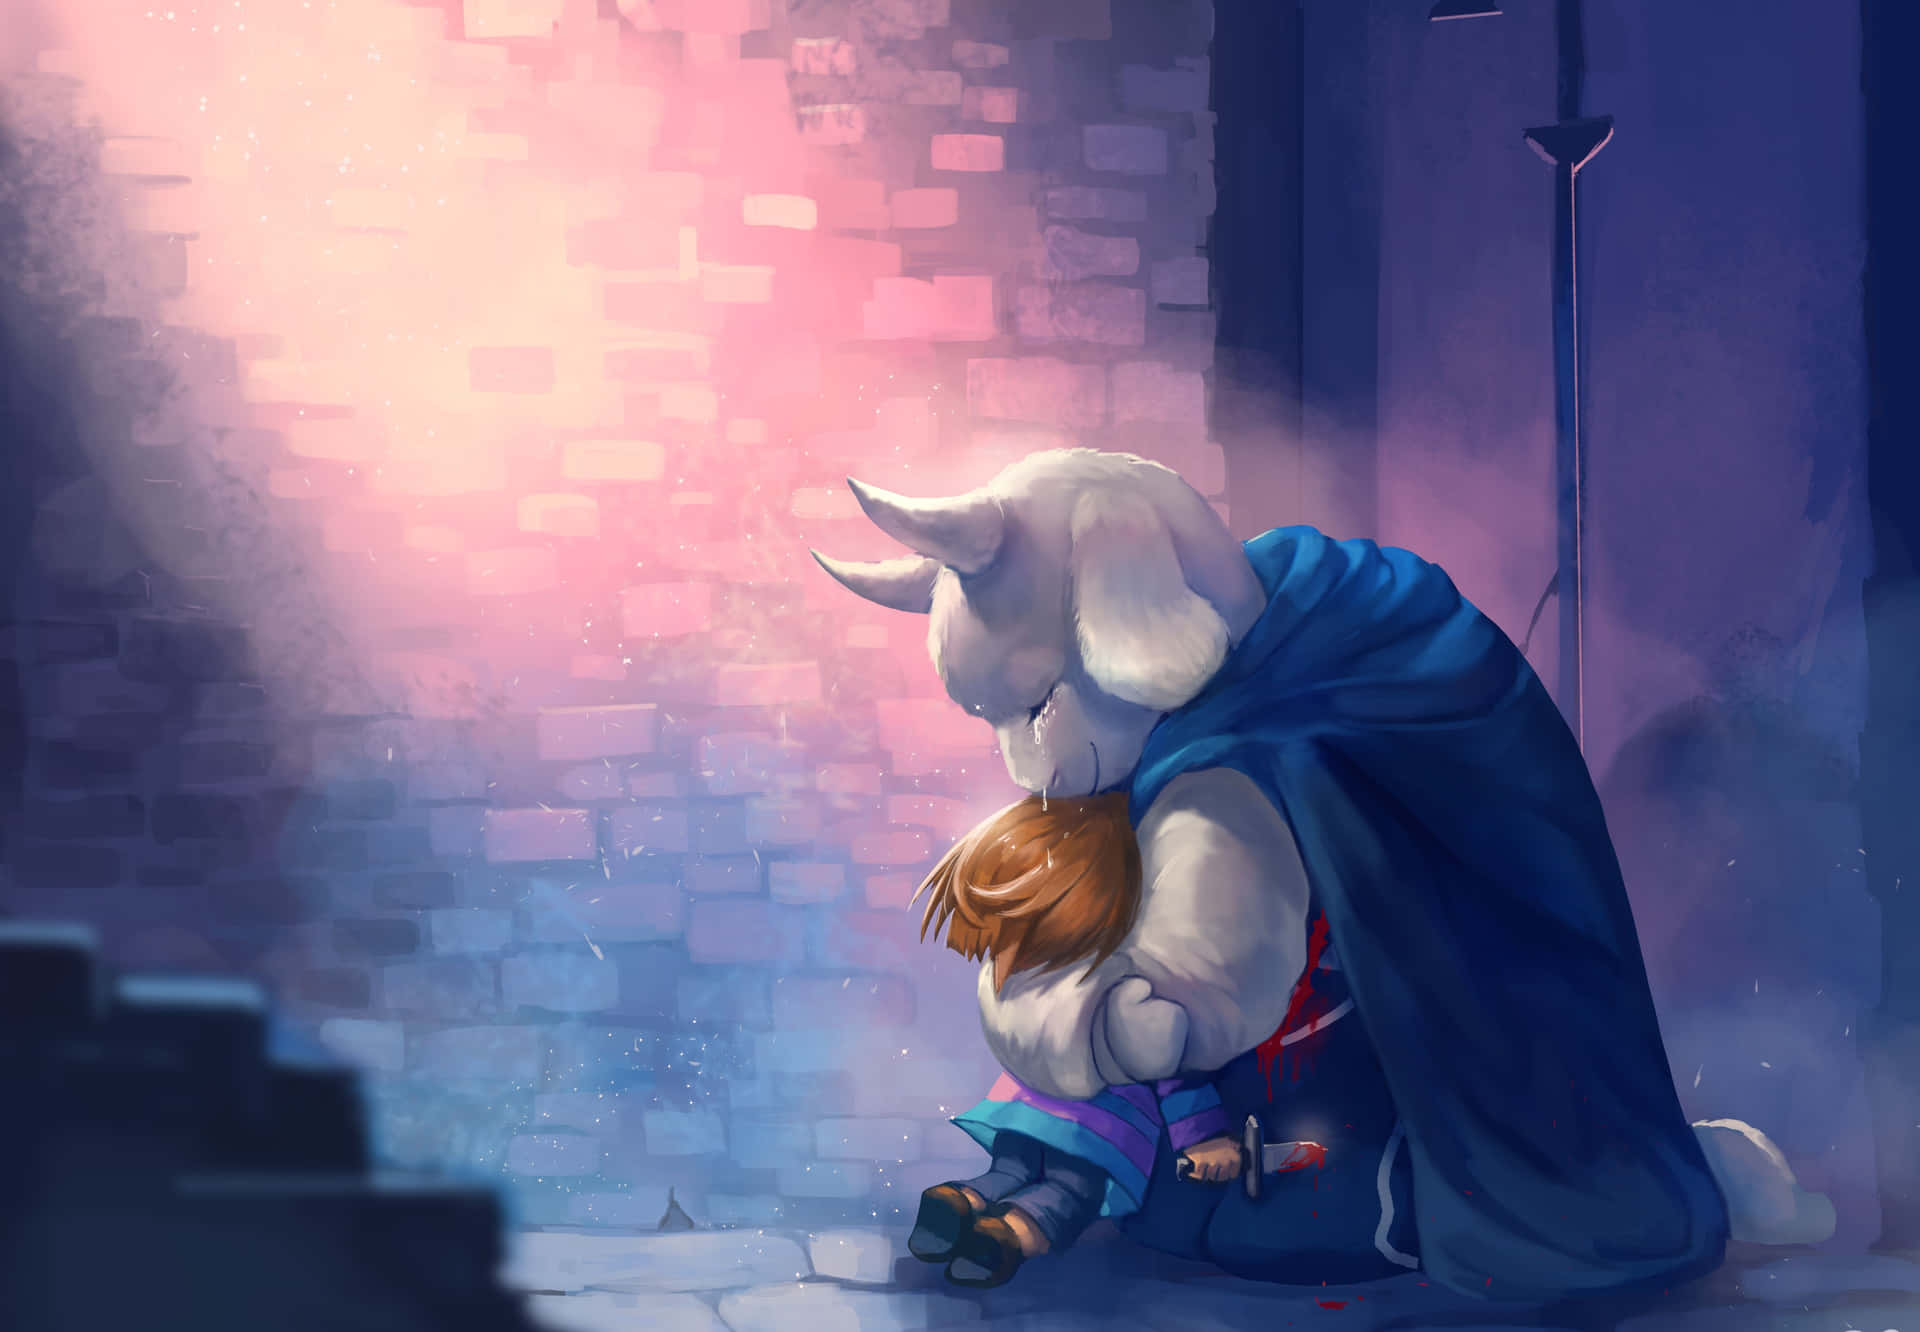 Follow your dreams with Frisk from Undertale Wallpaper